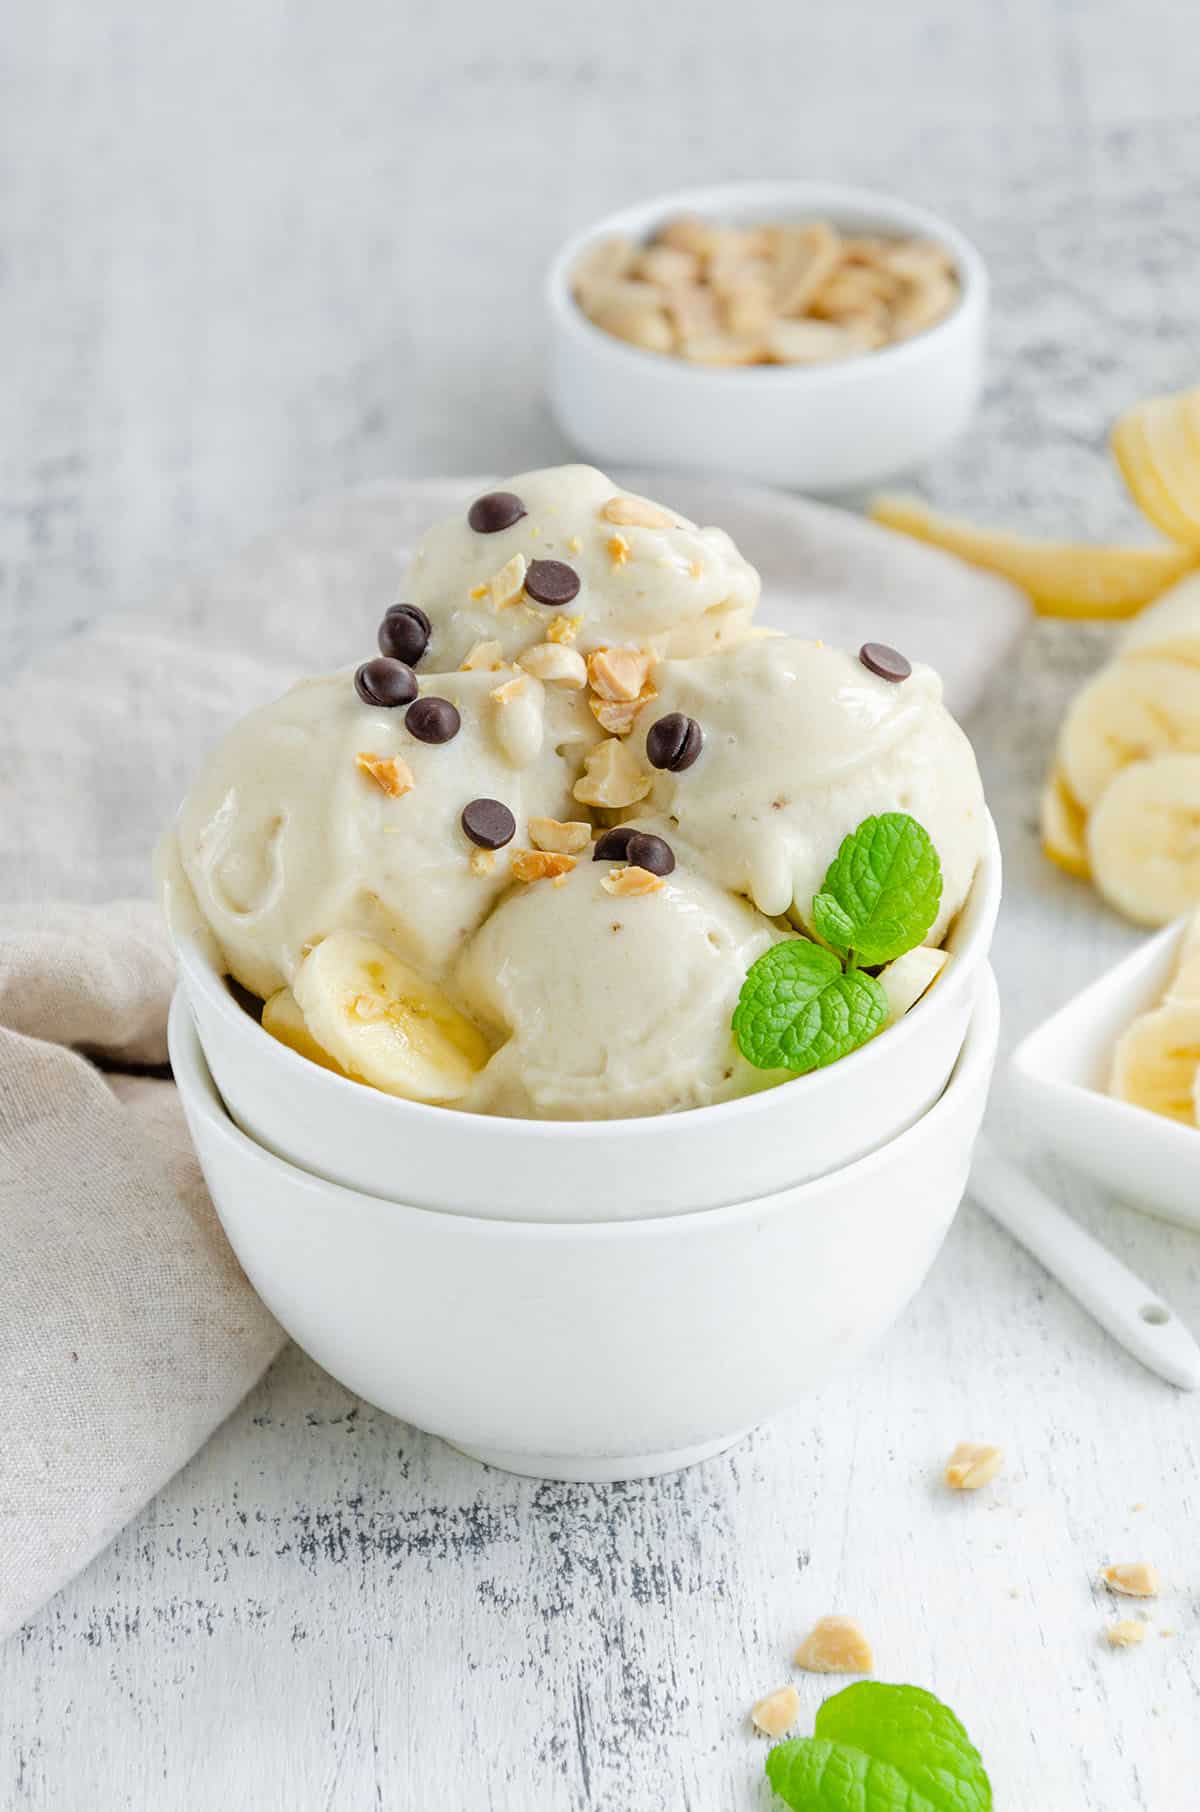 Homemade banana ice cream in a bowl with peanuts and chocolate on a wooden background. Healthy dessert.